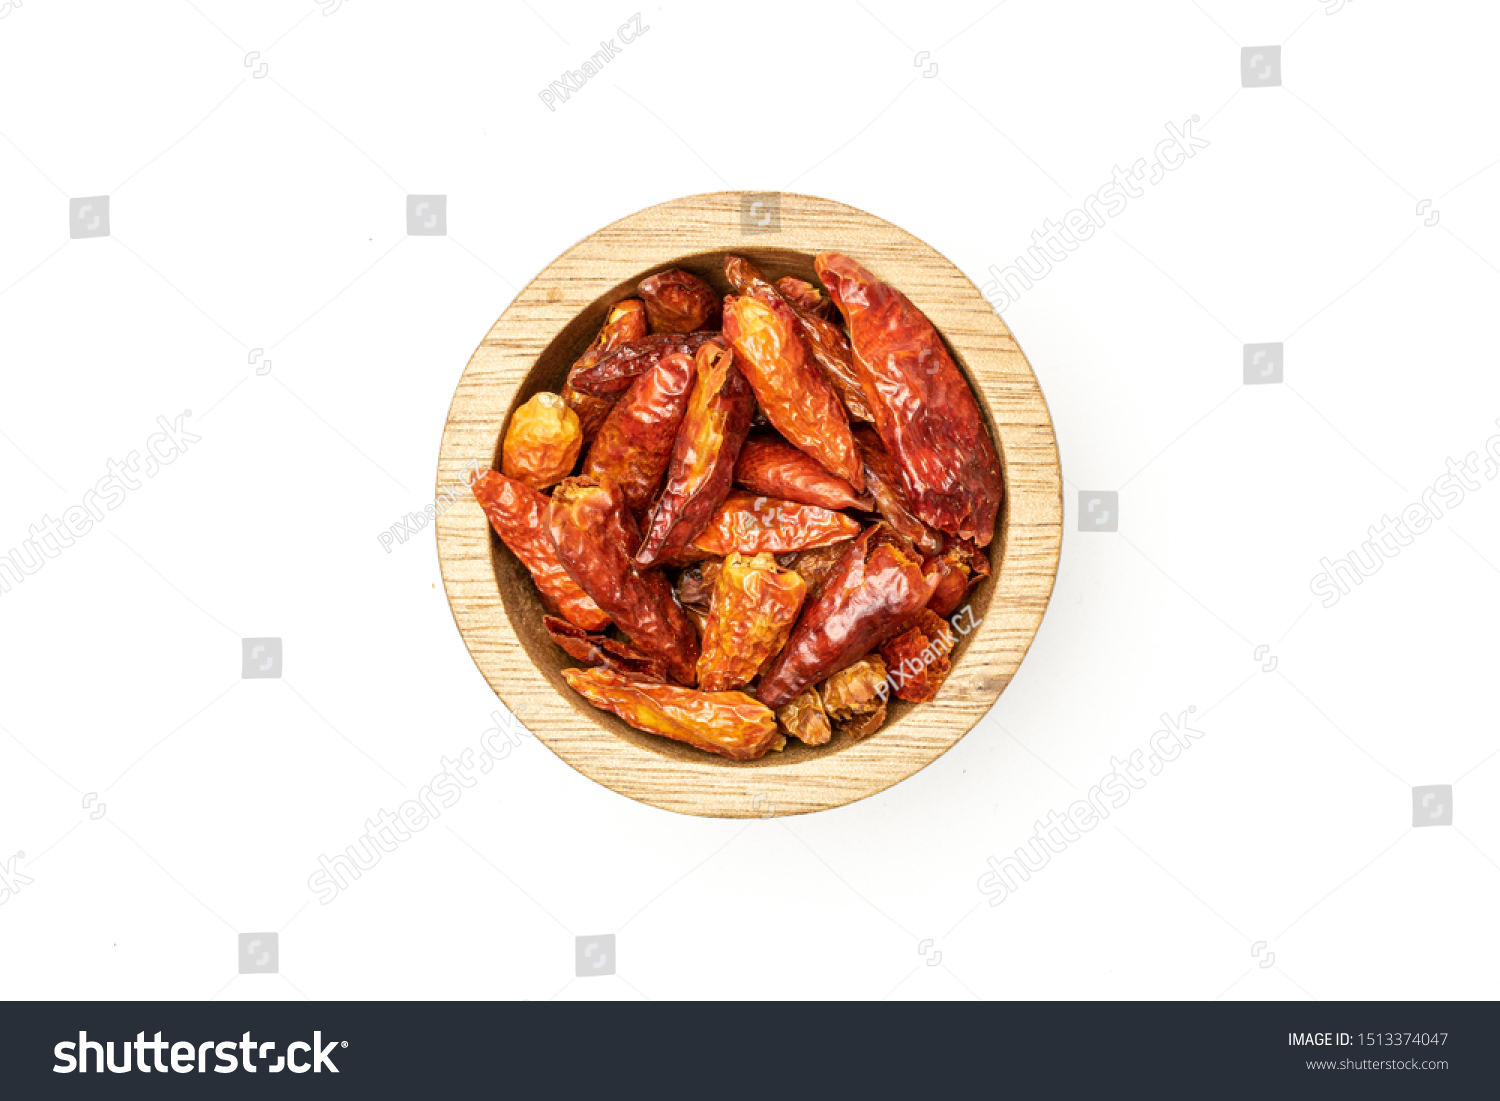 Lot of whole dry red chili pepper peperoncino in wooden bowl flatlay isolated on white background #1513374047